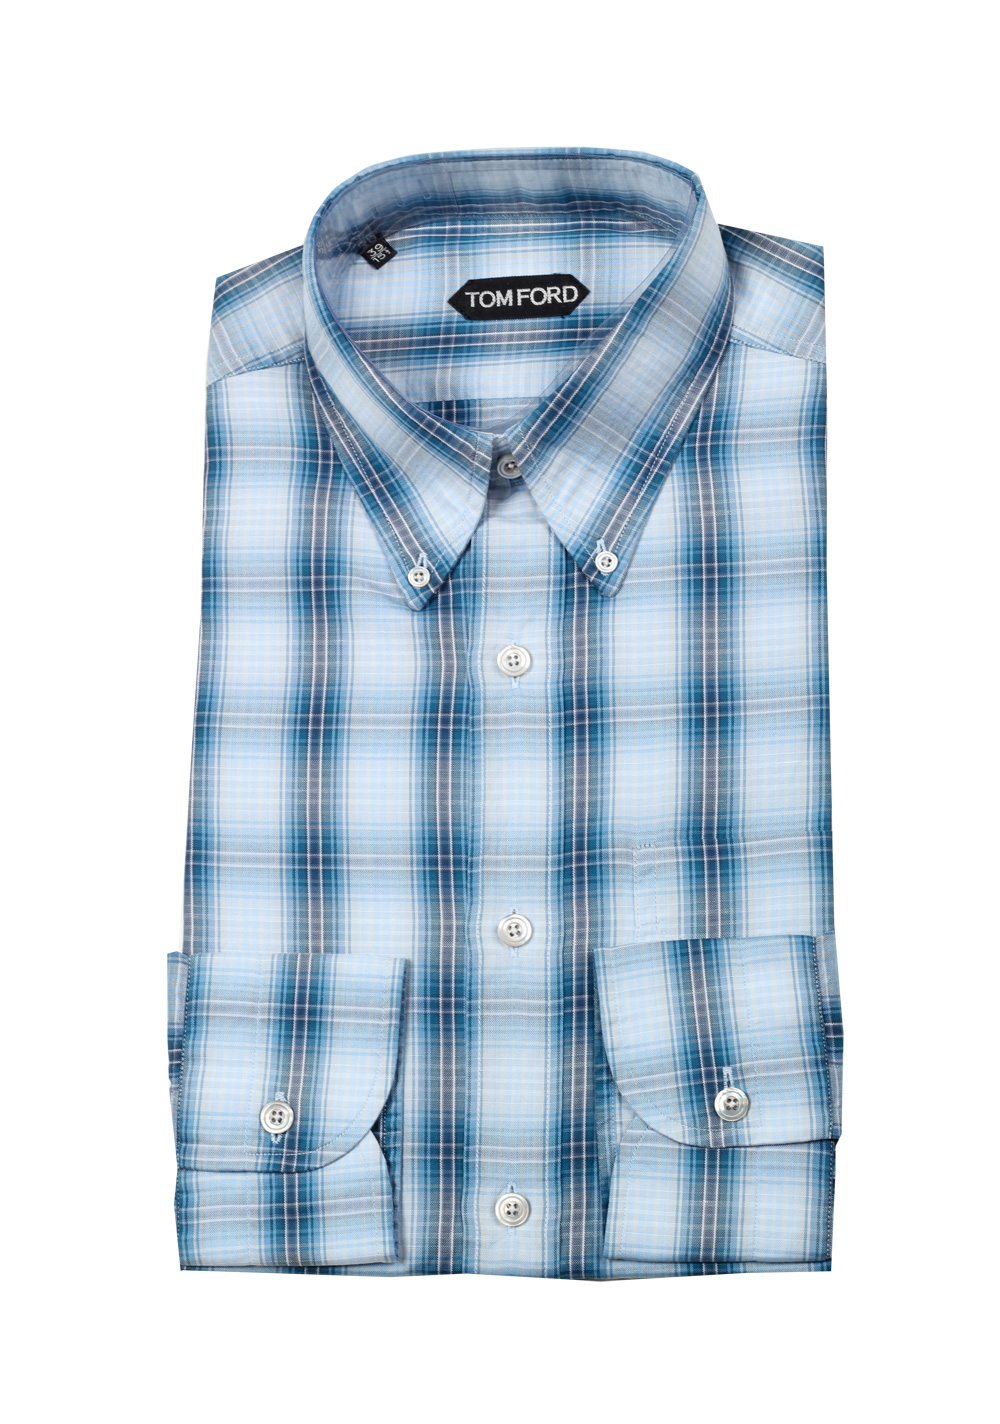 TOM FORD Checked Blue Button Down Casual Shirt Size 39 / 15,5 U.S. | Costume Limité